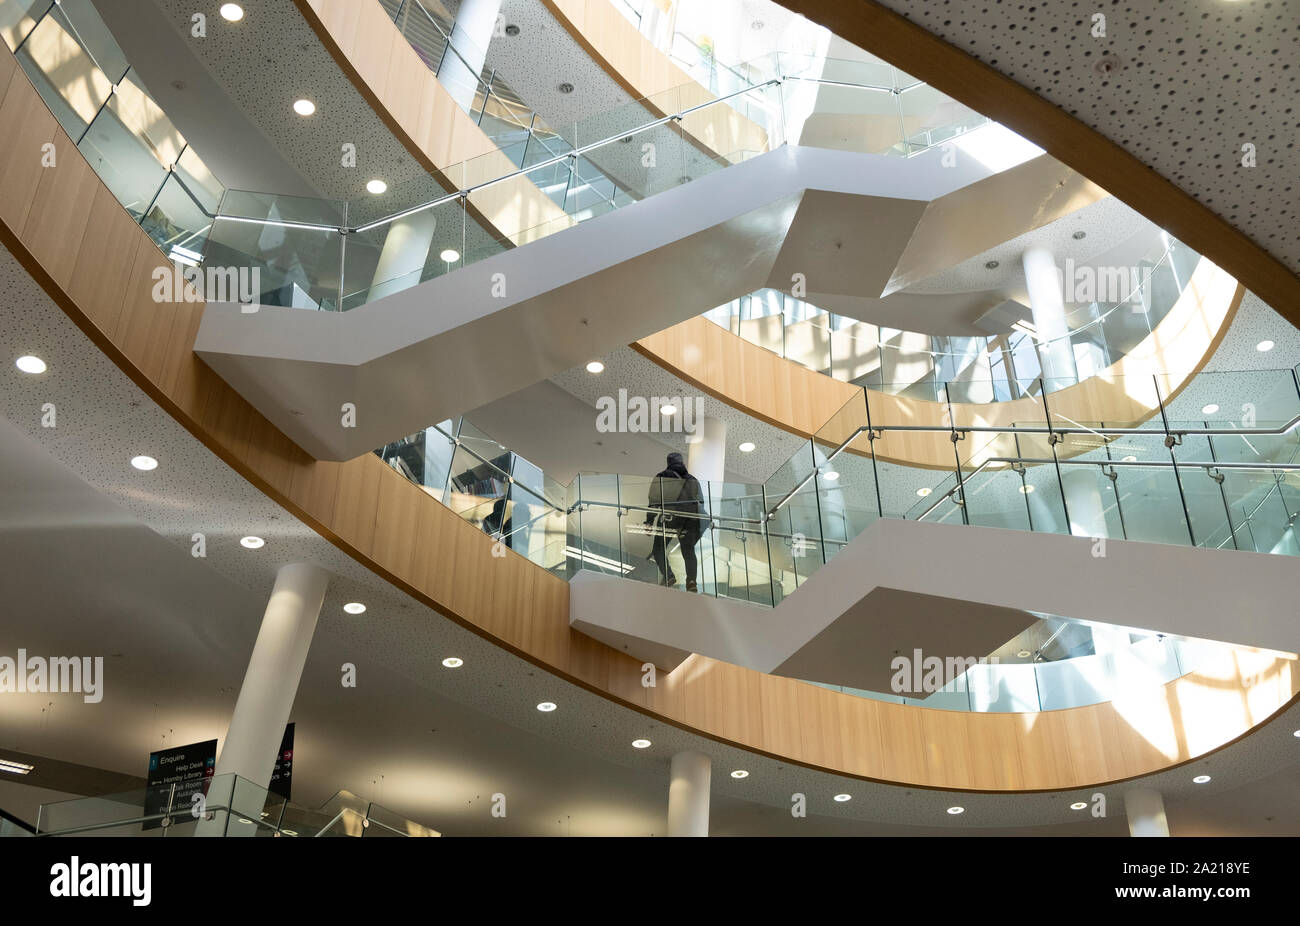 Liverpool Central Library, Liverpool, UK - overlapping staircases of glass and steel, stunning modern architecture behind a classical facade Stock Photo